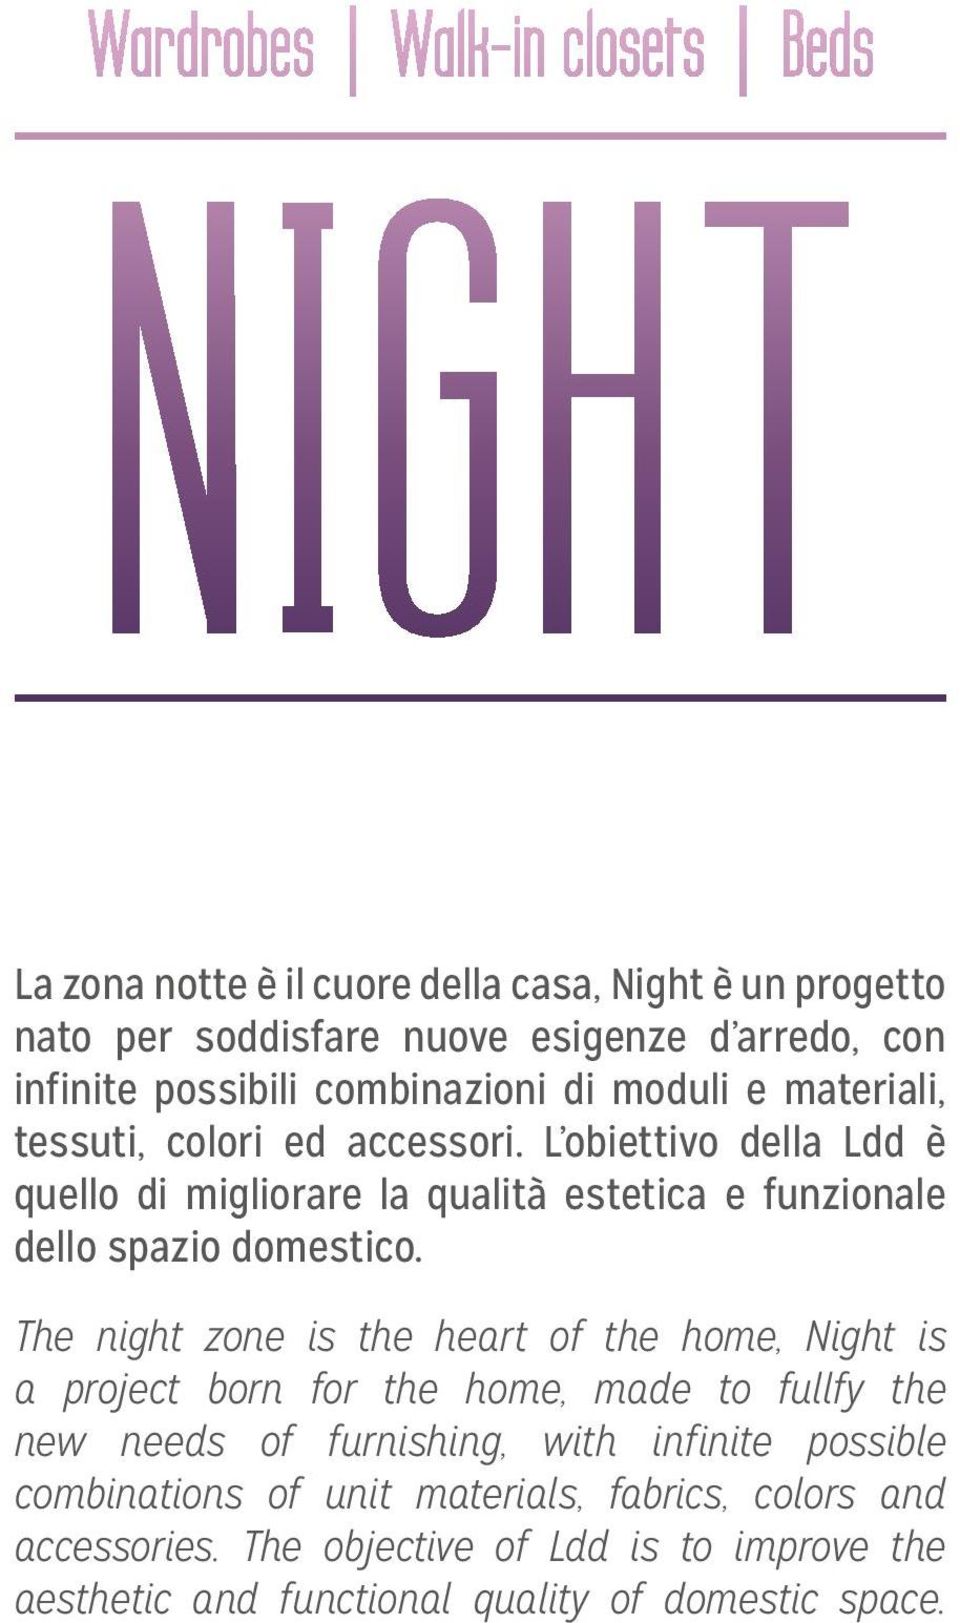 The night zone is the heart of the home, Night is a project born for the home, made to fullfy the new needs of furnishing, with infinite possible